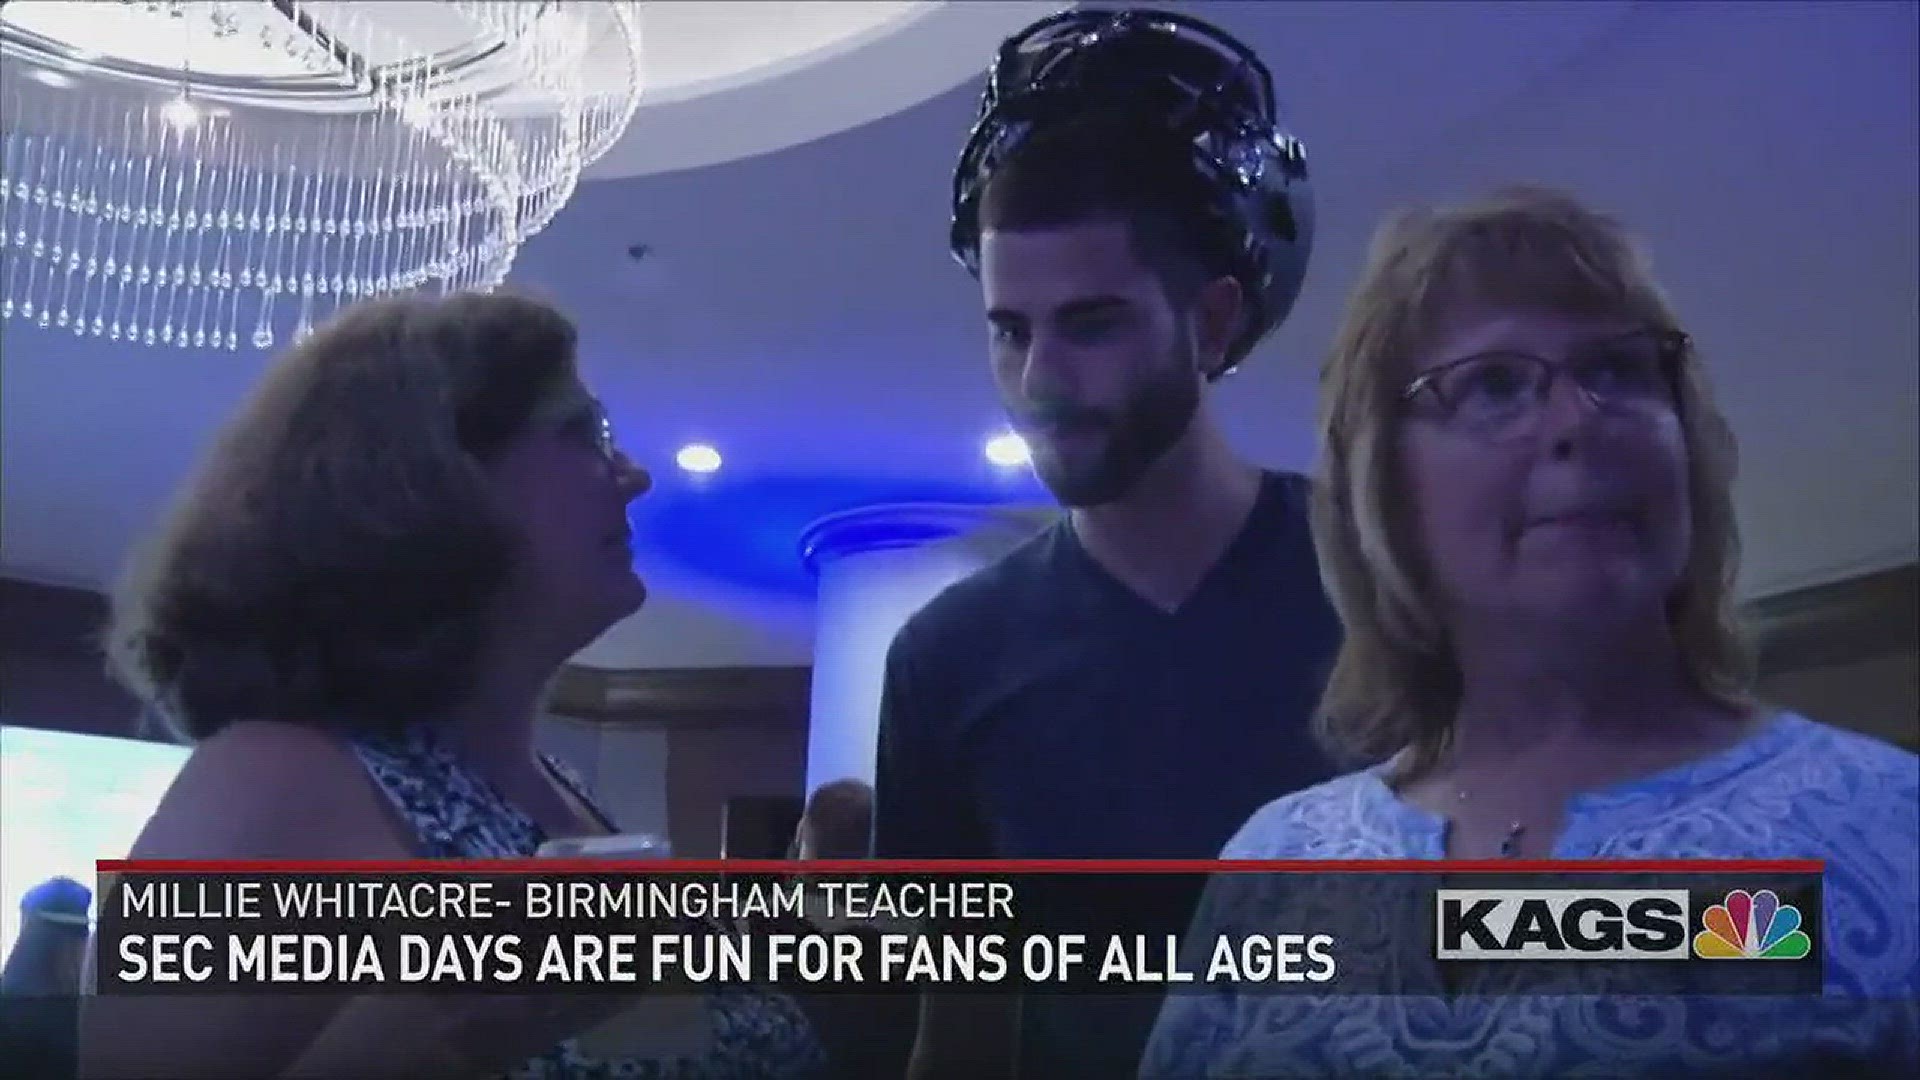 We meet Millie Whitacre from Birmingham as she visits SEC Media Days.